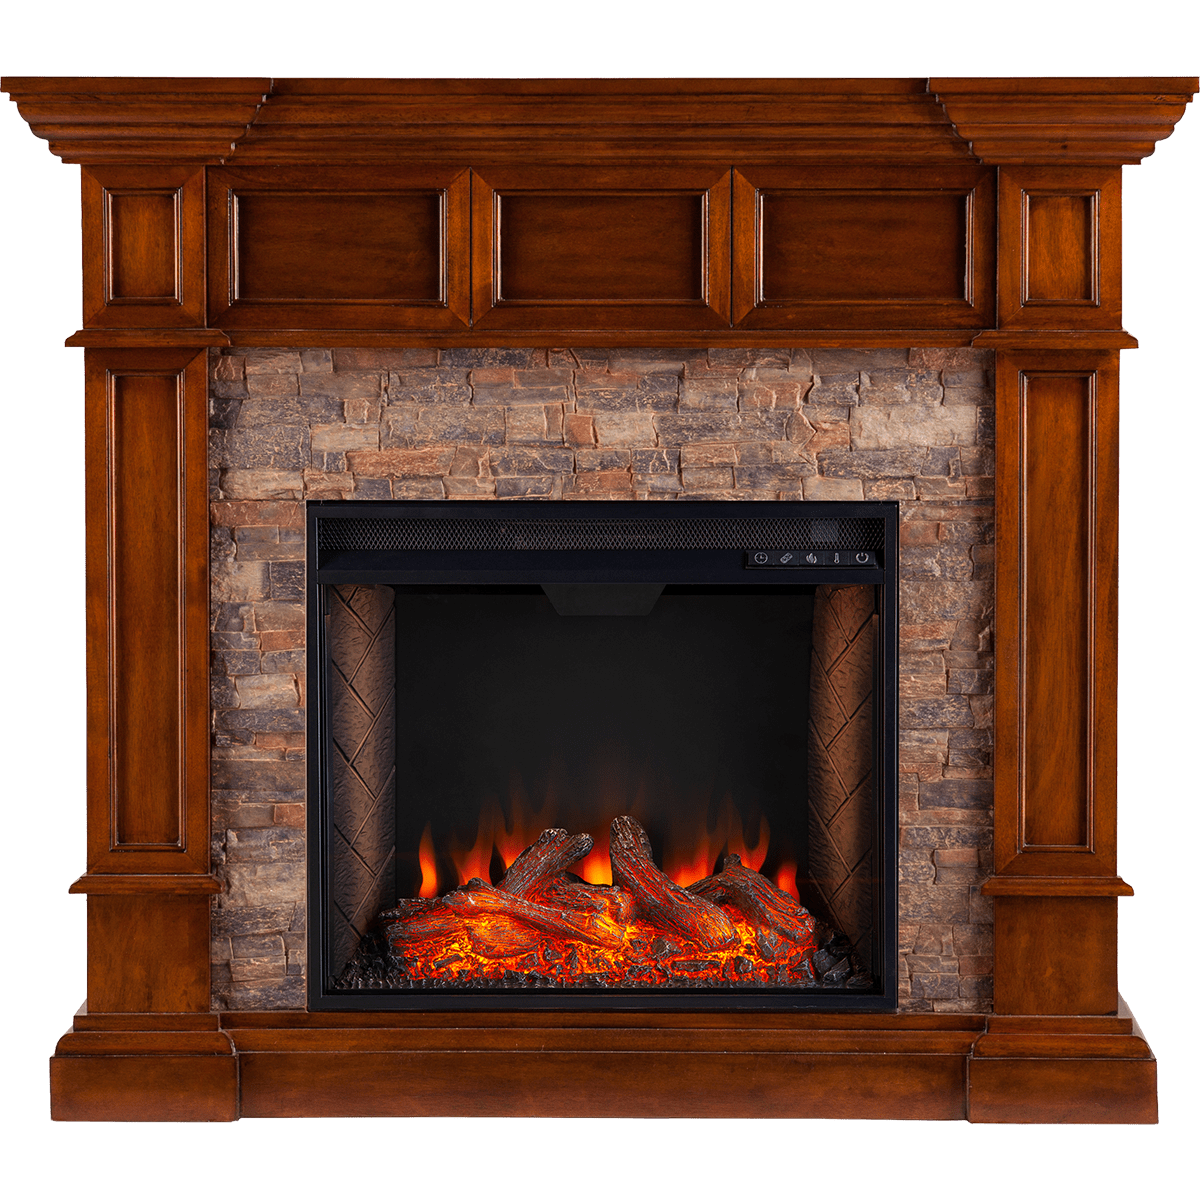 Dimplex Electric Fireplace Parts Fresh southern Enterprises Merrimack Simulated Stone Convertible Electric Fireplace